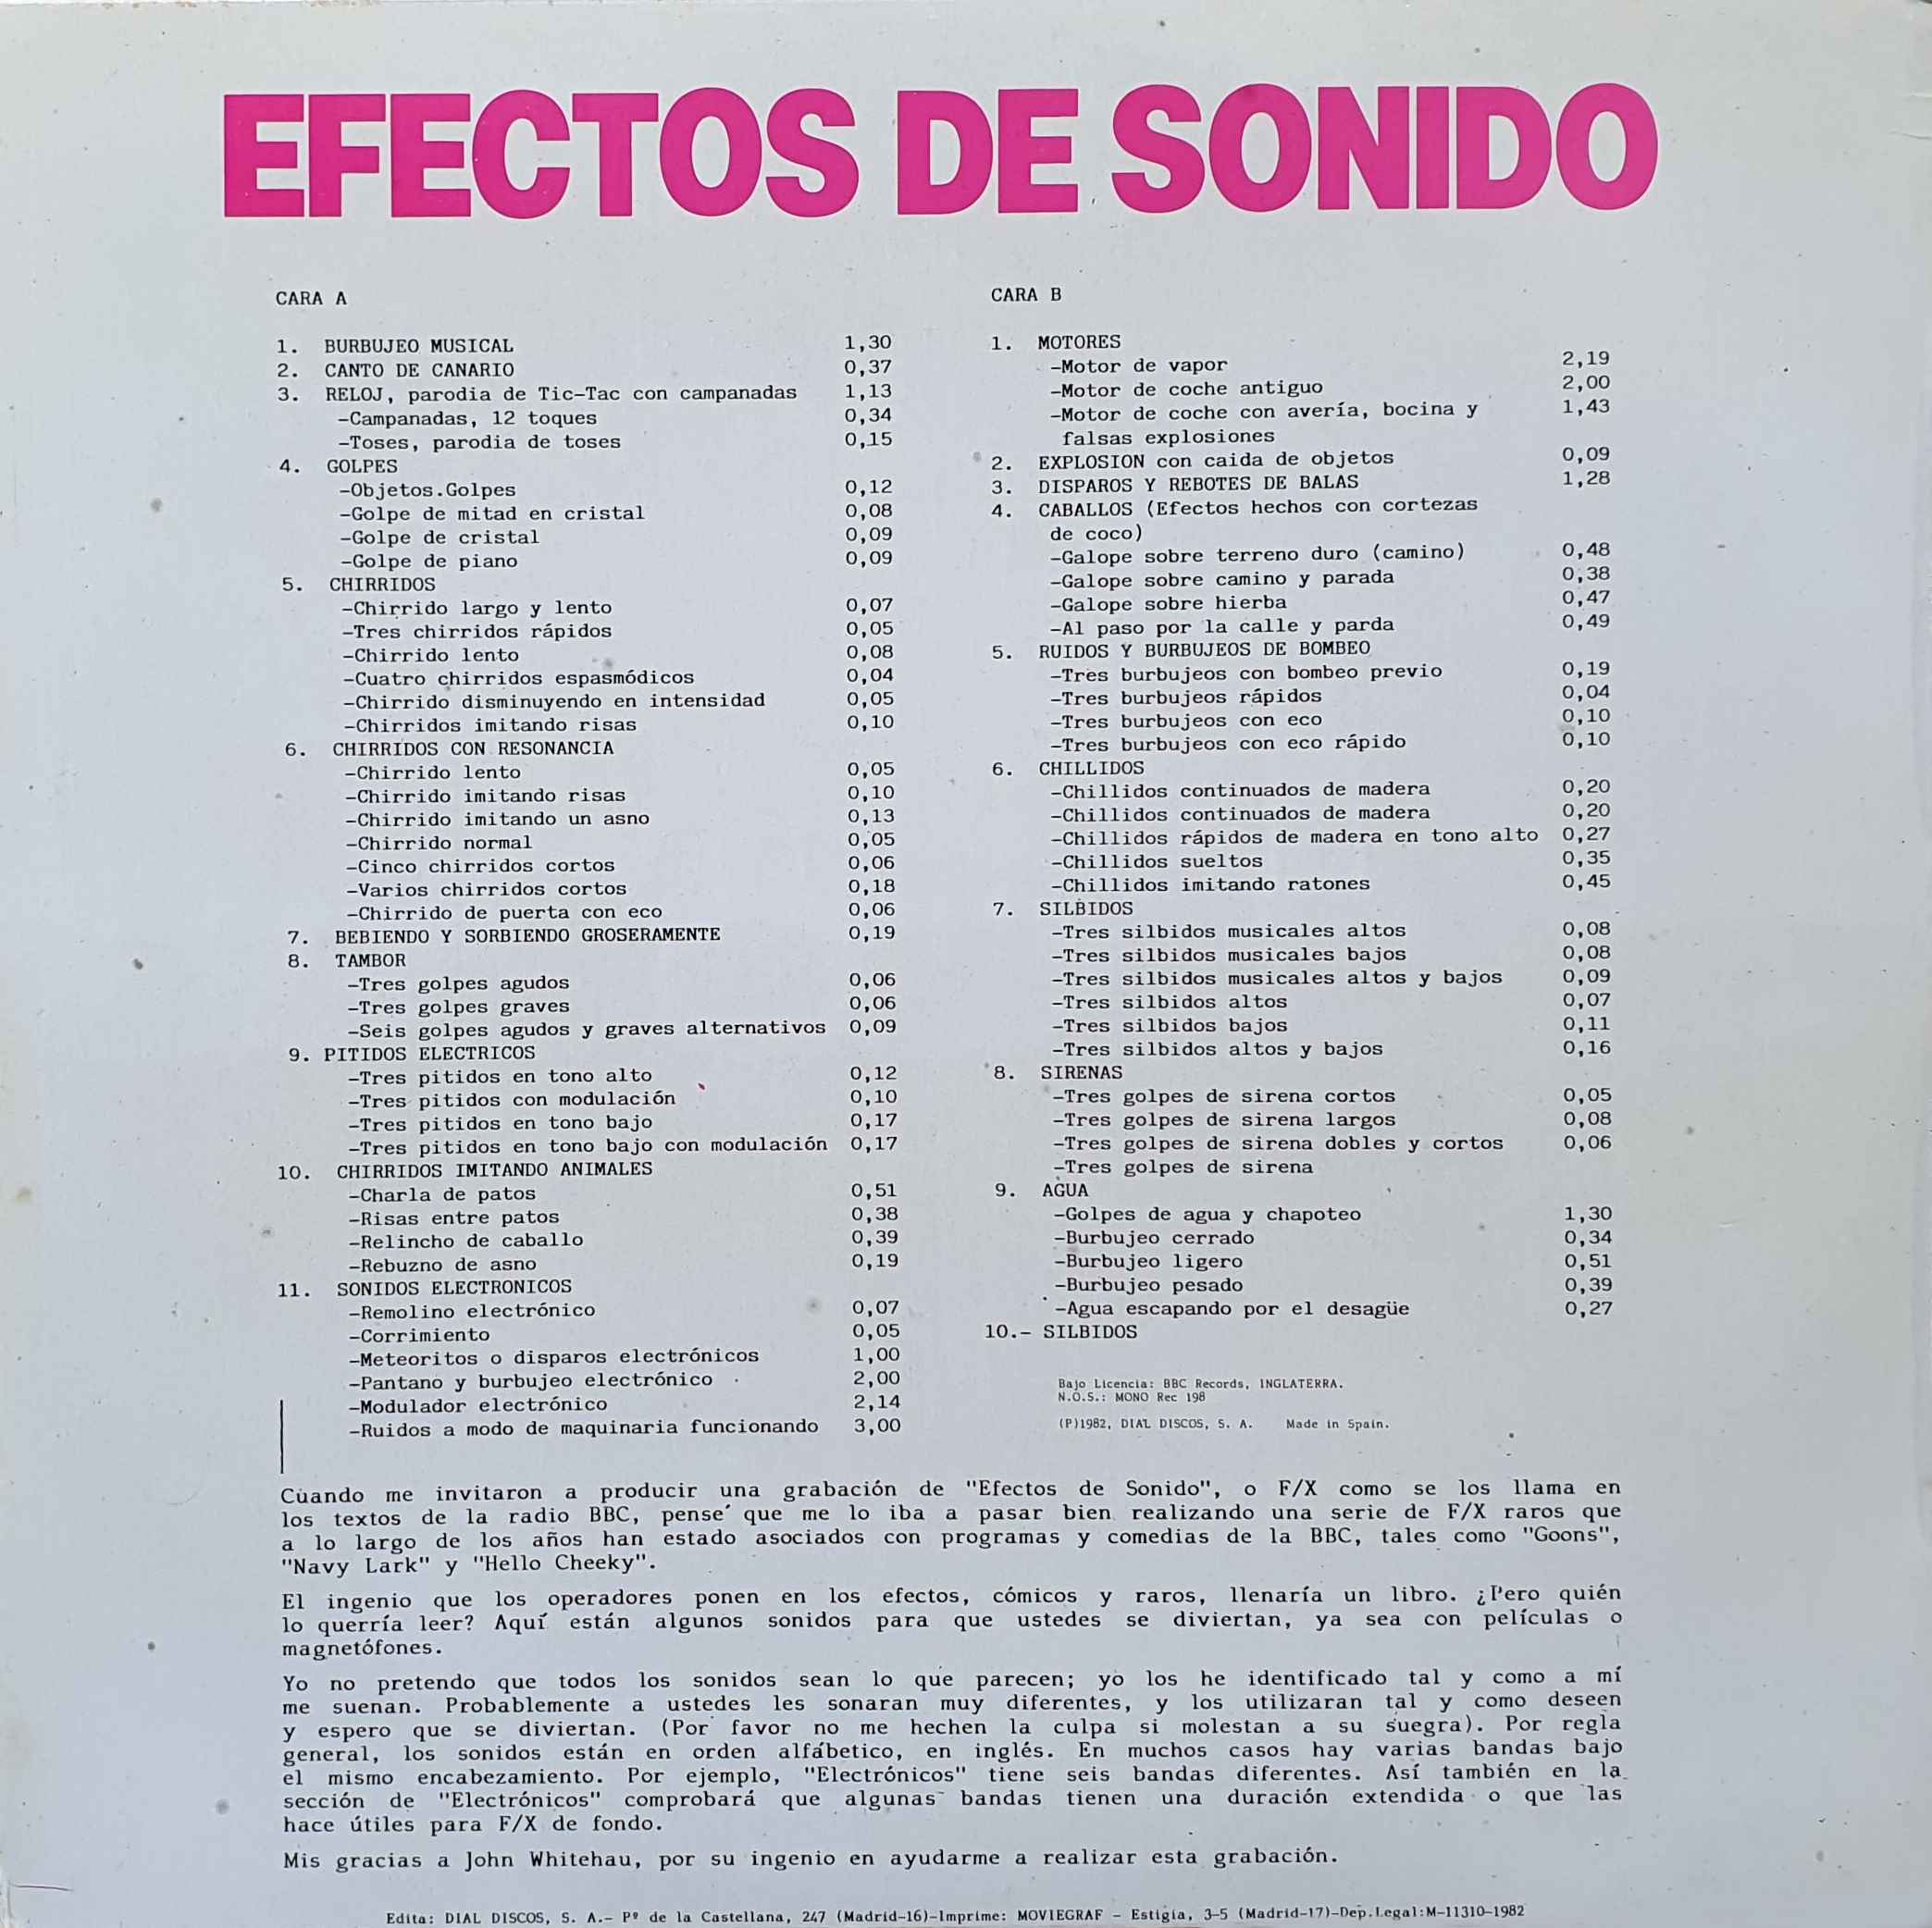 Picture of 51.0115 Efectos de sonido Vol.11 by artist Various from the BBC records and Tapes library